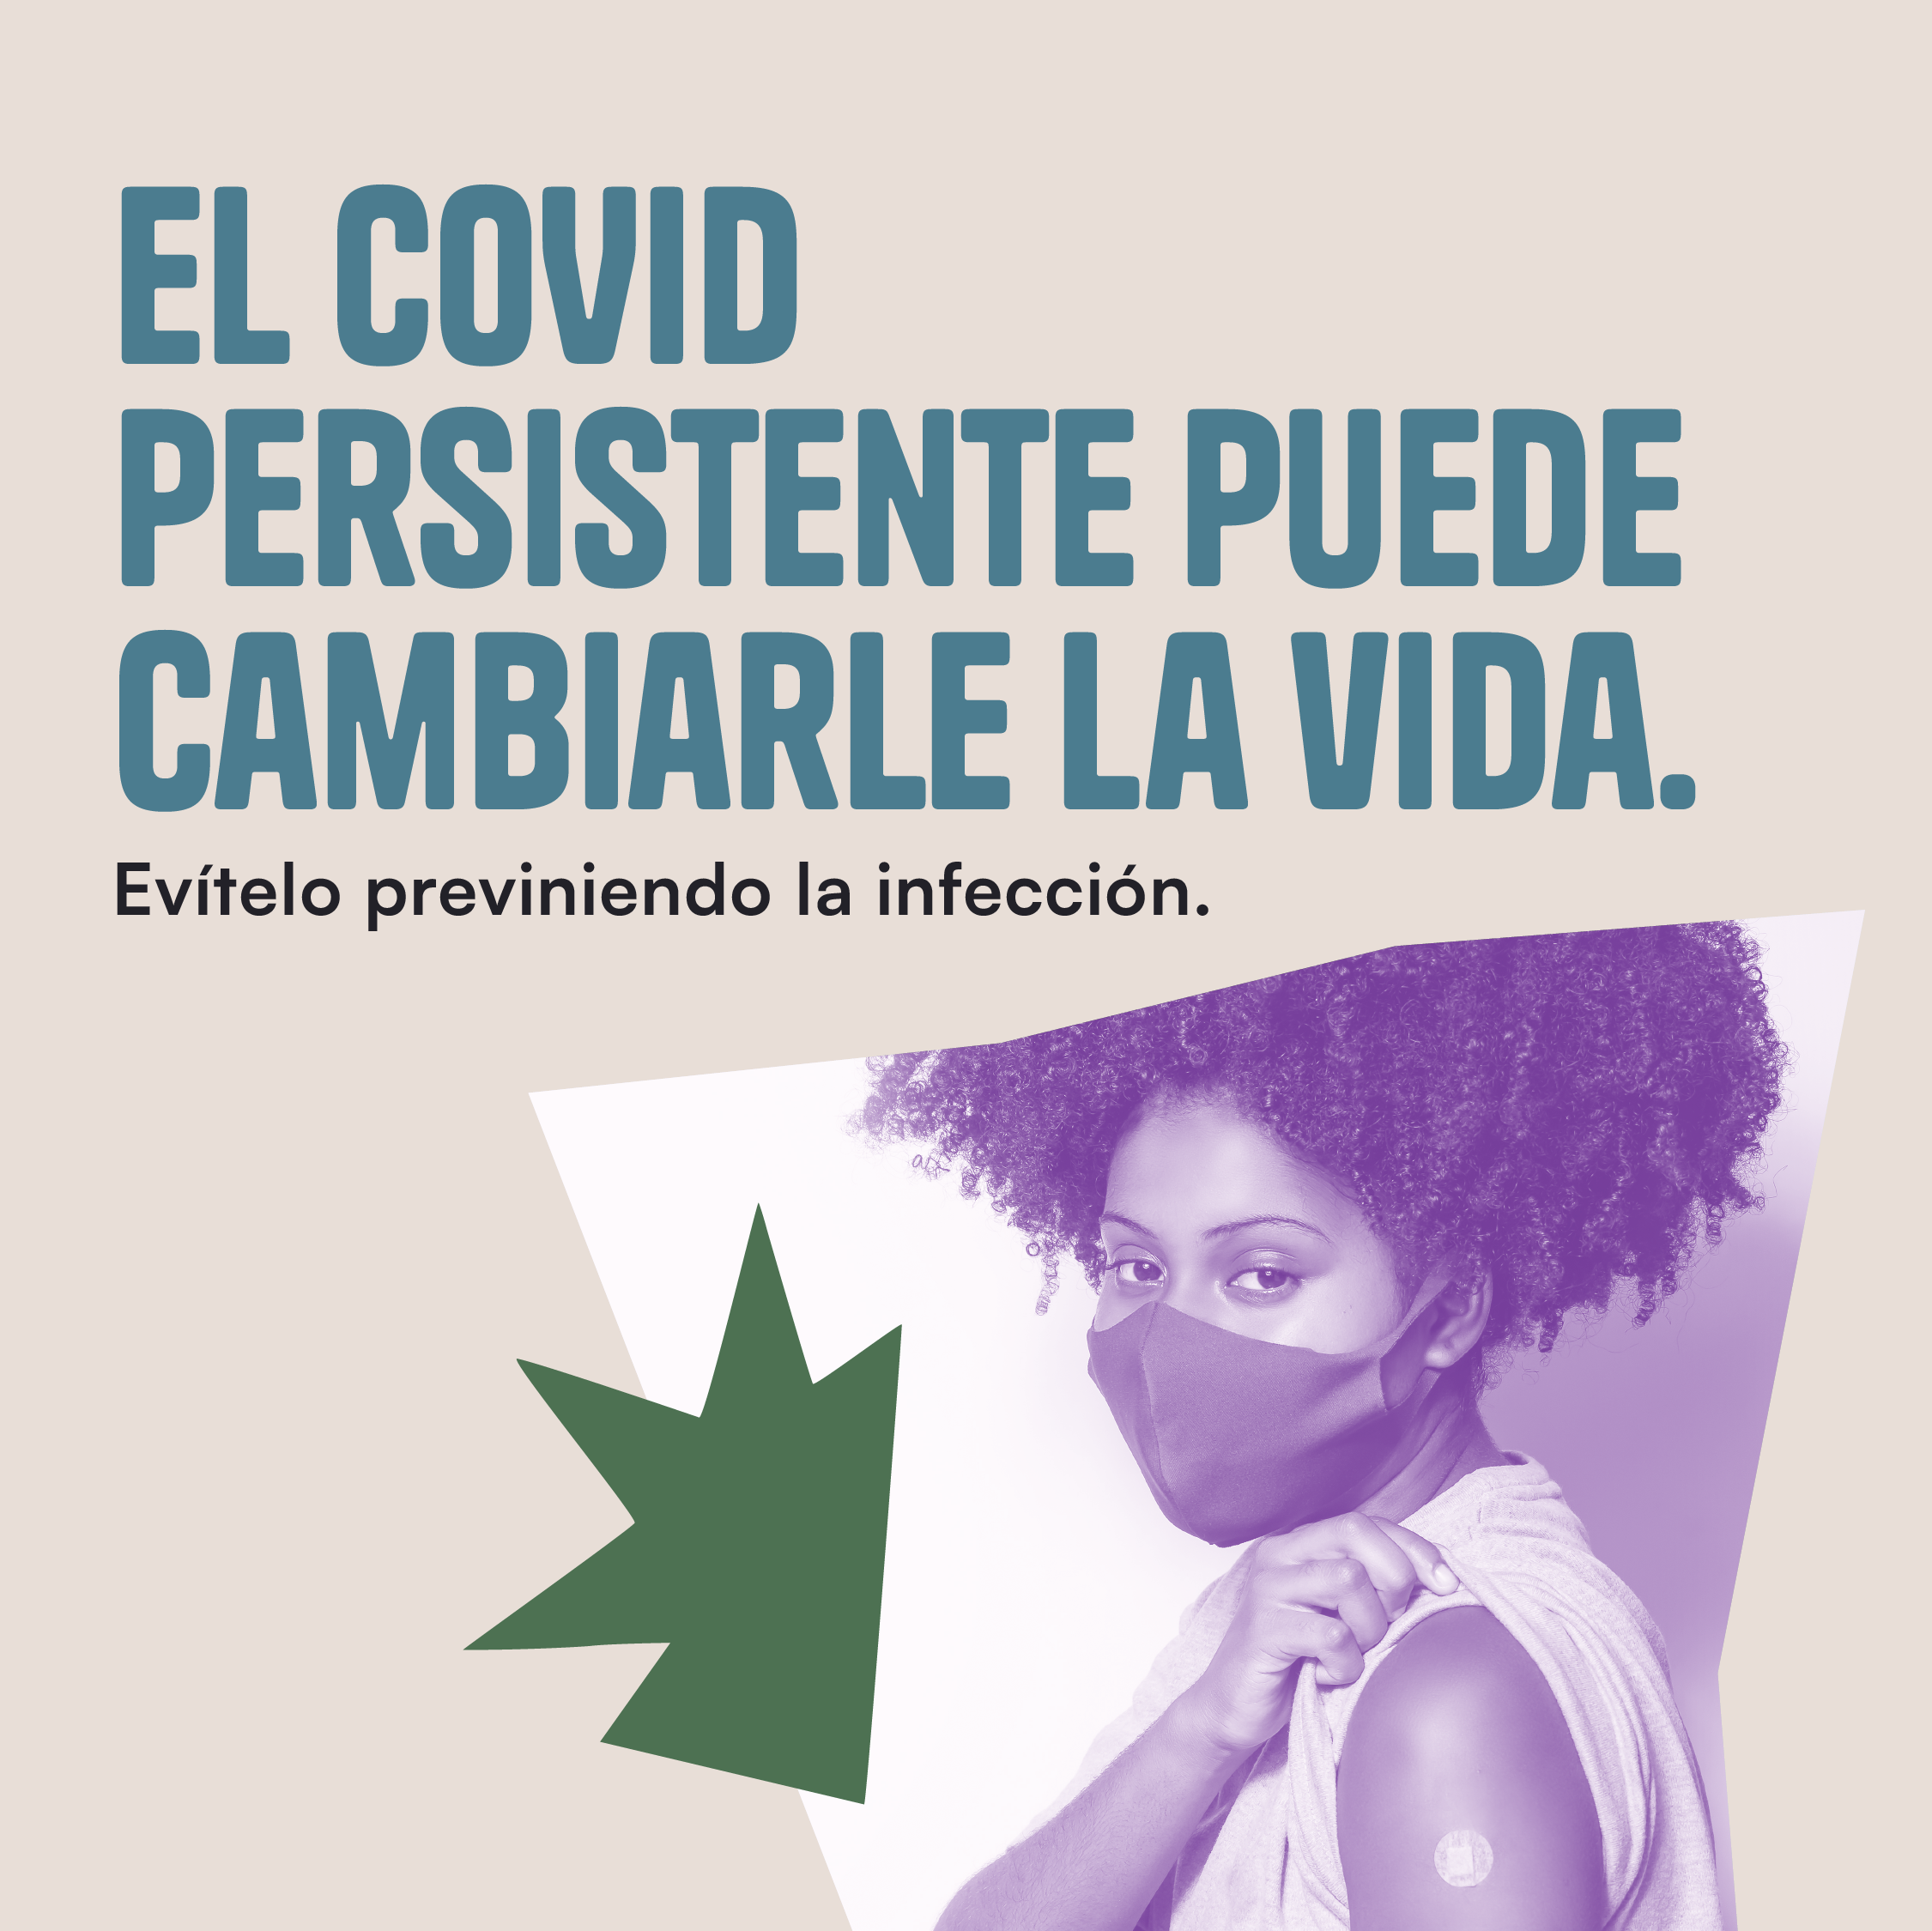 Thumbnail image of a Black woman wearing a mask holding up her sleeve revealing an adhesive bandage implying she has been vaccinated against COVID-19. The text reads "Long COVID can be life-changing. Avoid it by preventing infection in the first place."